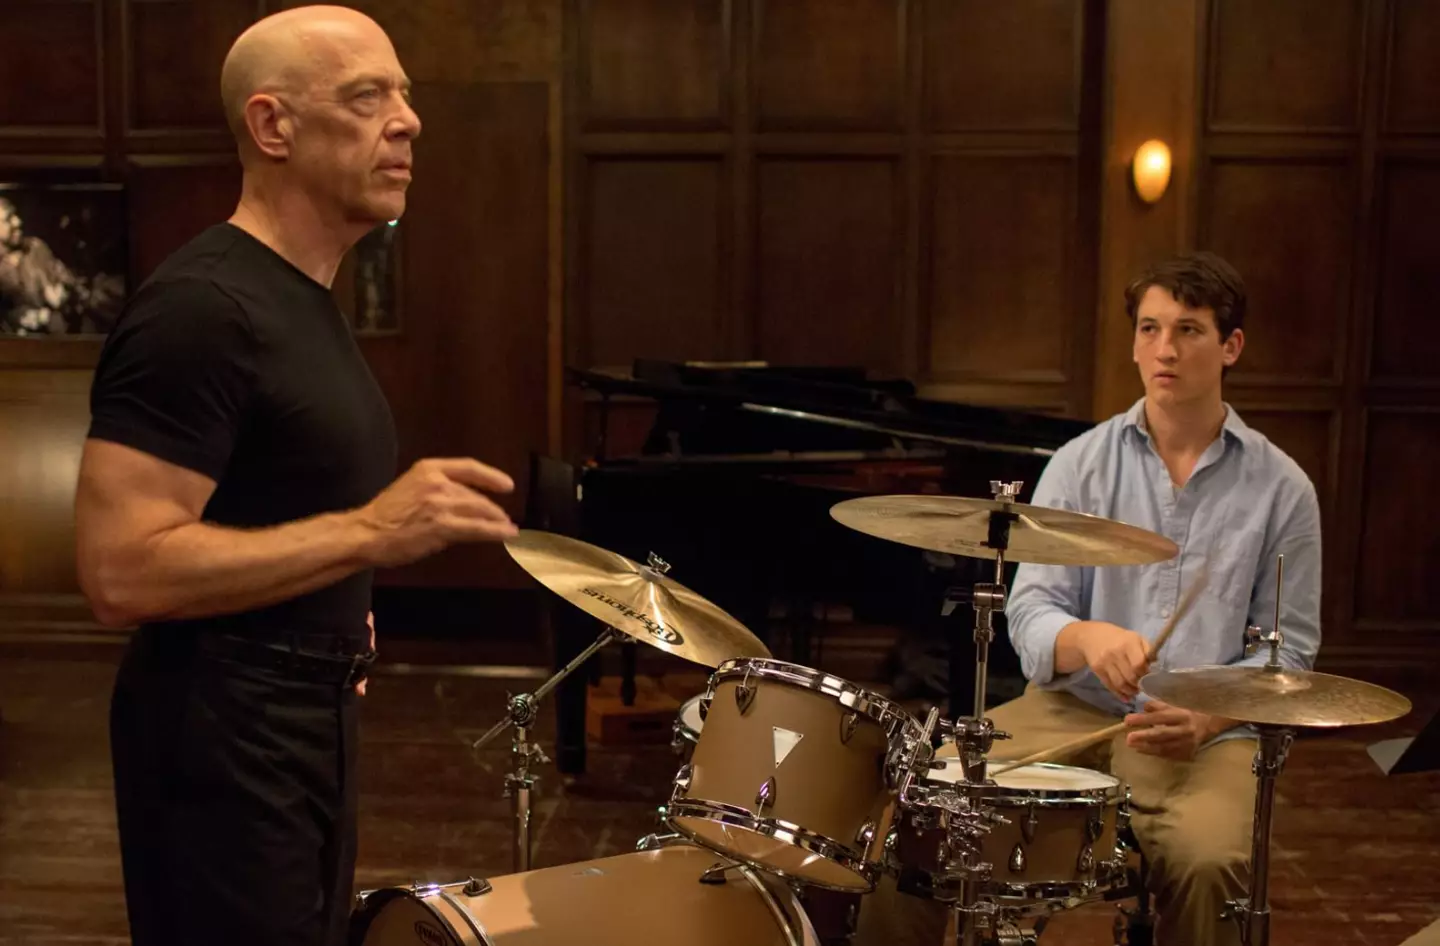 J.K. Simmons captivates audiences with a terrifying portrayal of a manipulative music instructor.